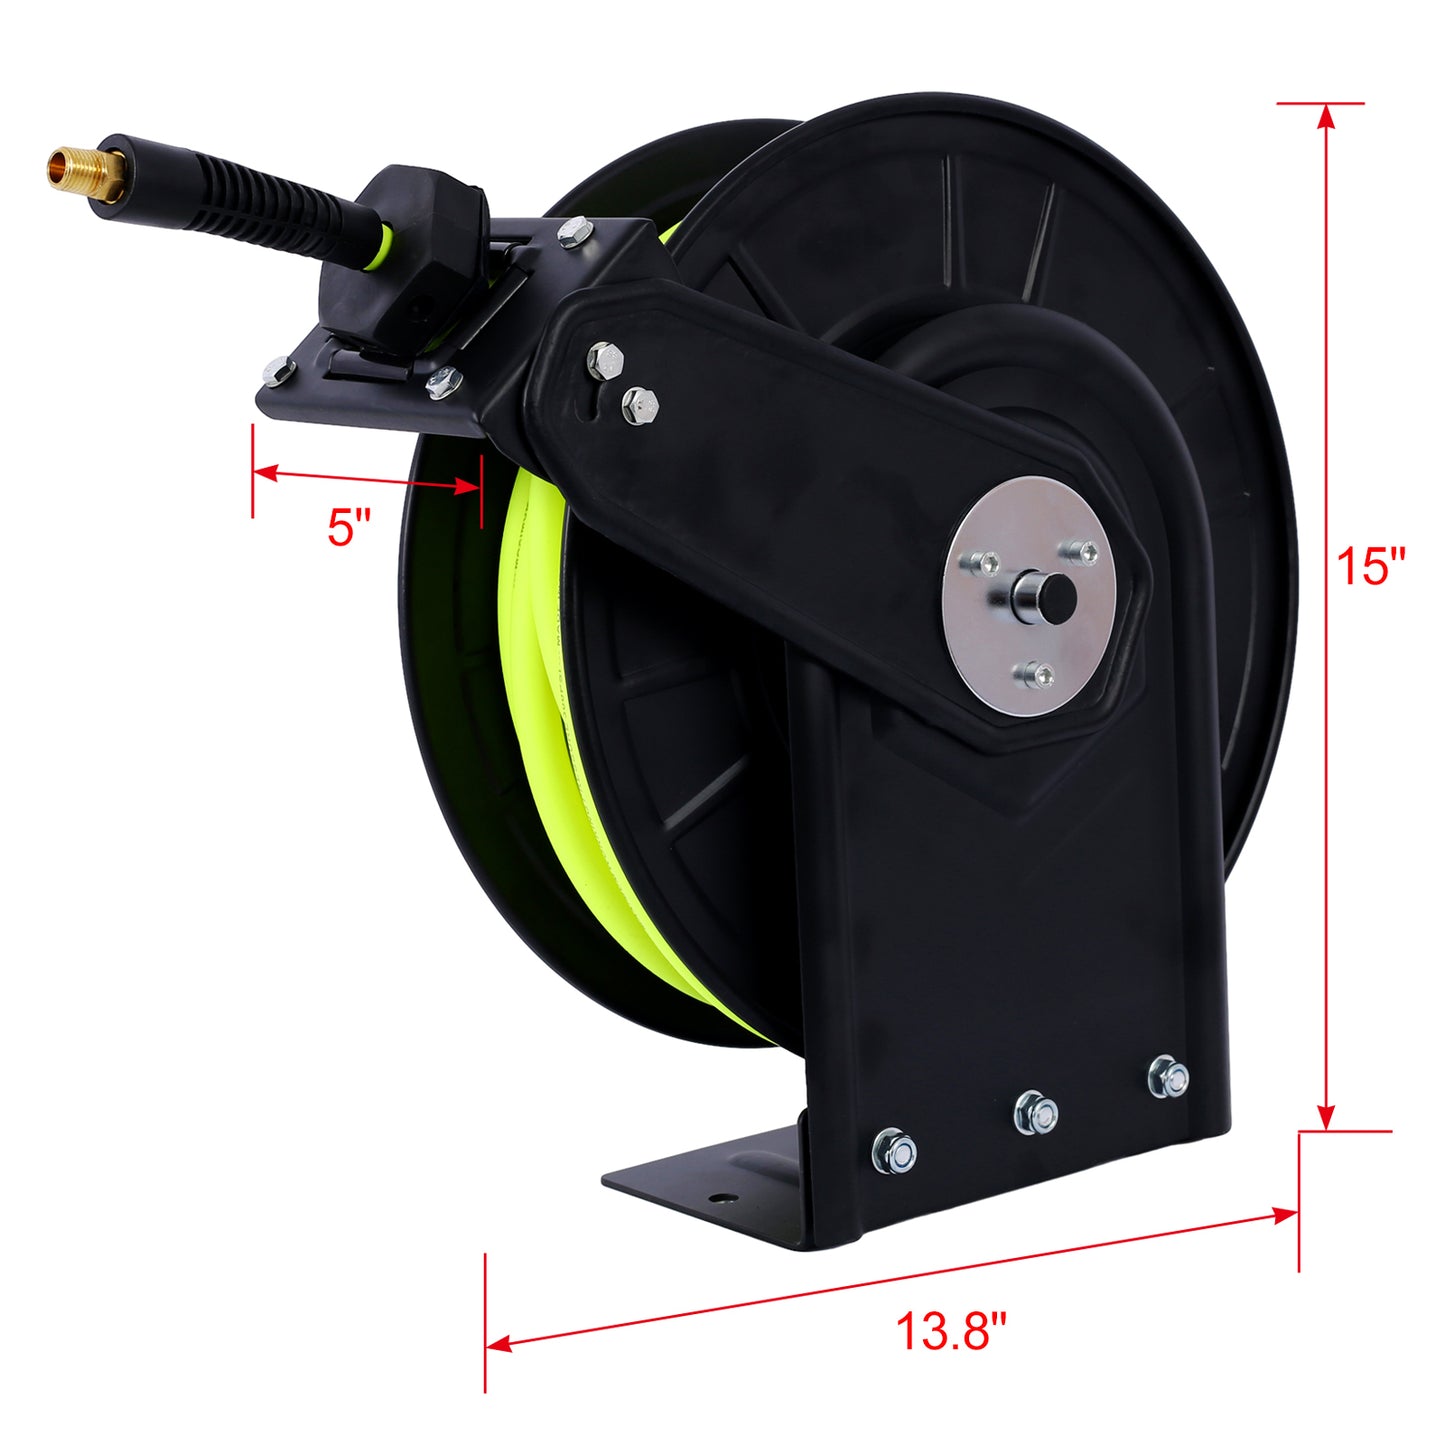 Retractable Air Hose Reel With 3/8" Inch x 50' Ft,Heavy Duty Steel Hose Reel Auto Rewind Pneumatic,Industrial Grade Rubber Hose,300 PSI,Black